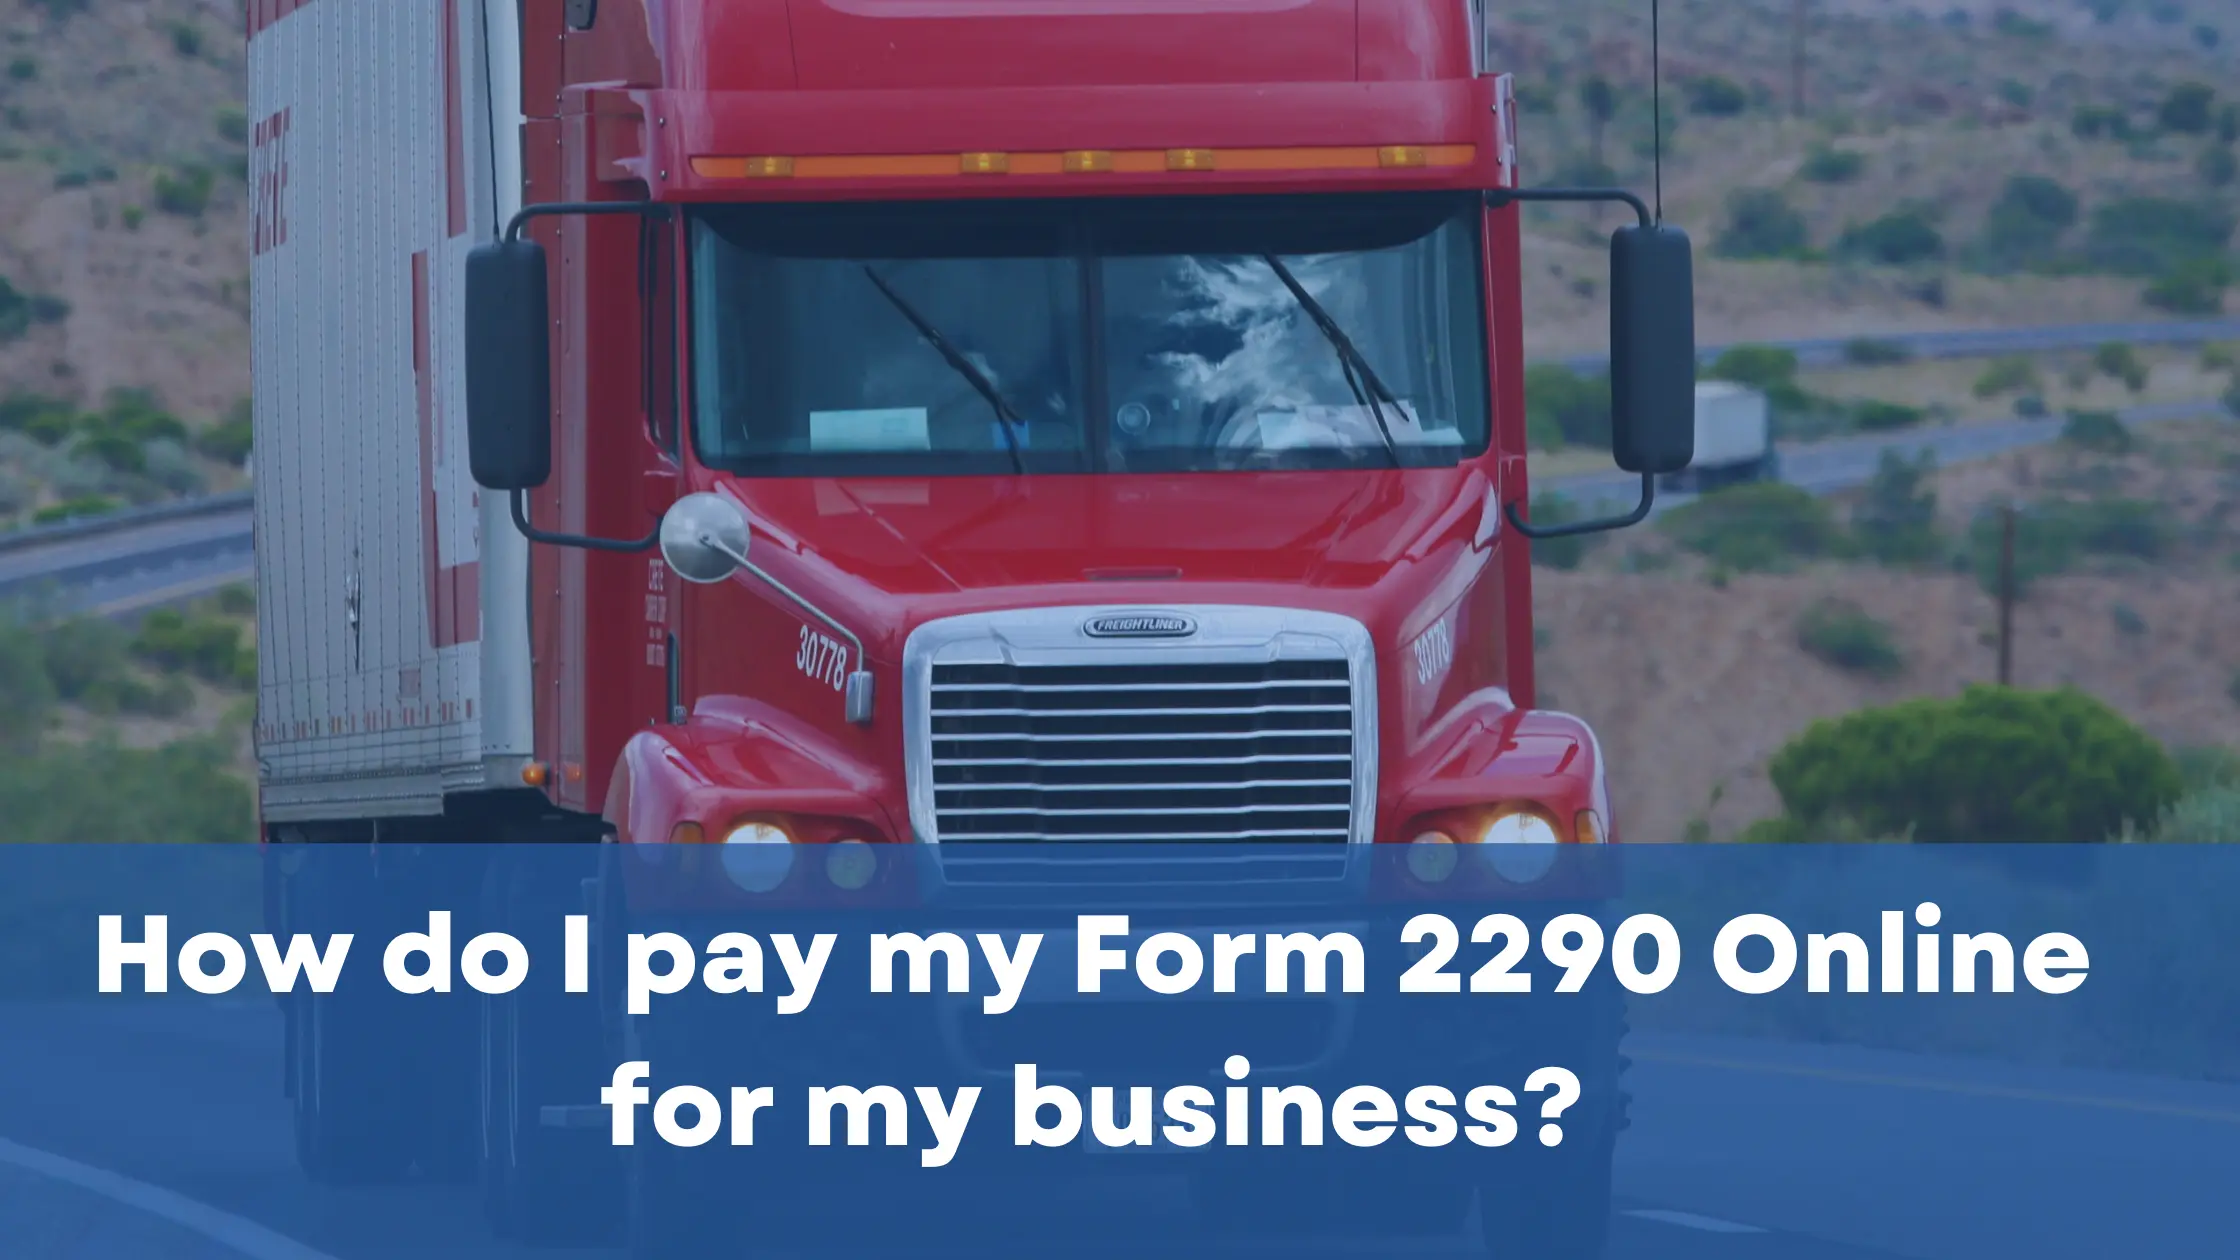 How Do I Pay My Form 2290 Online for my business